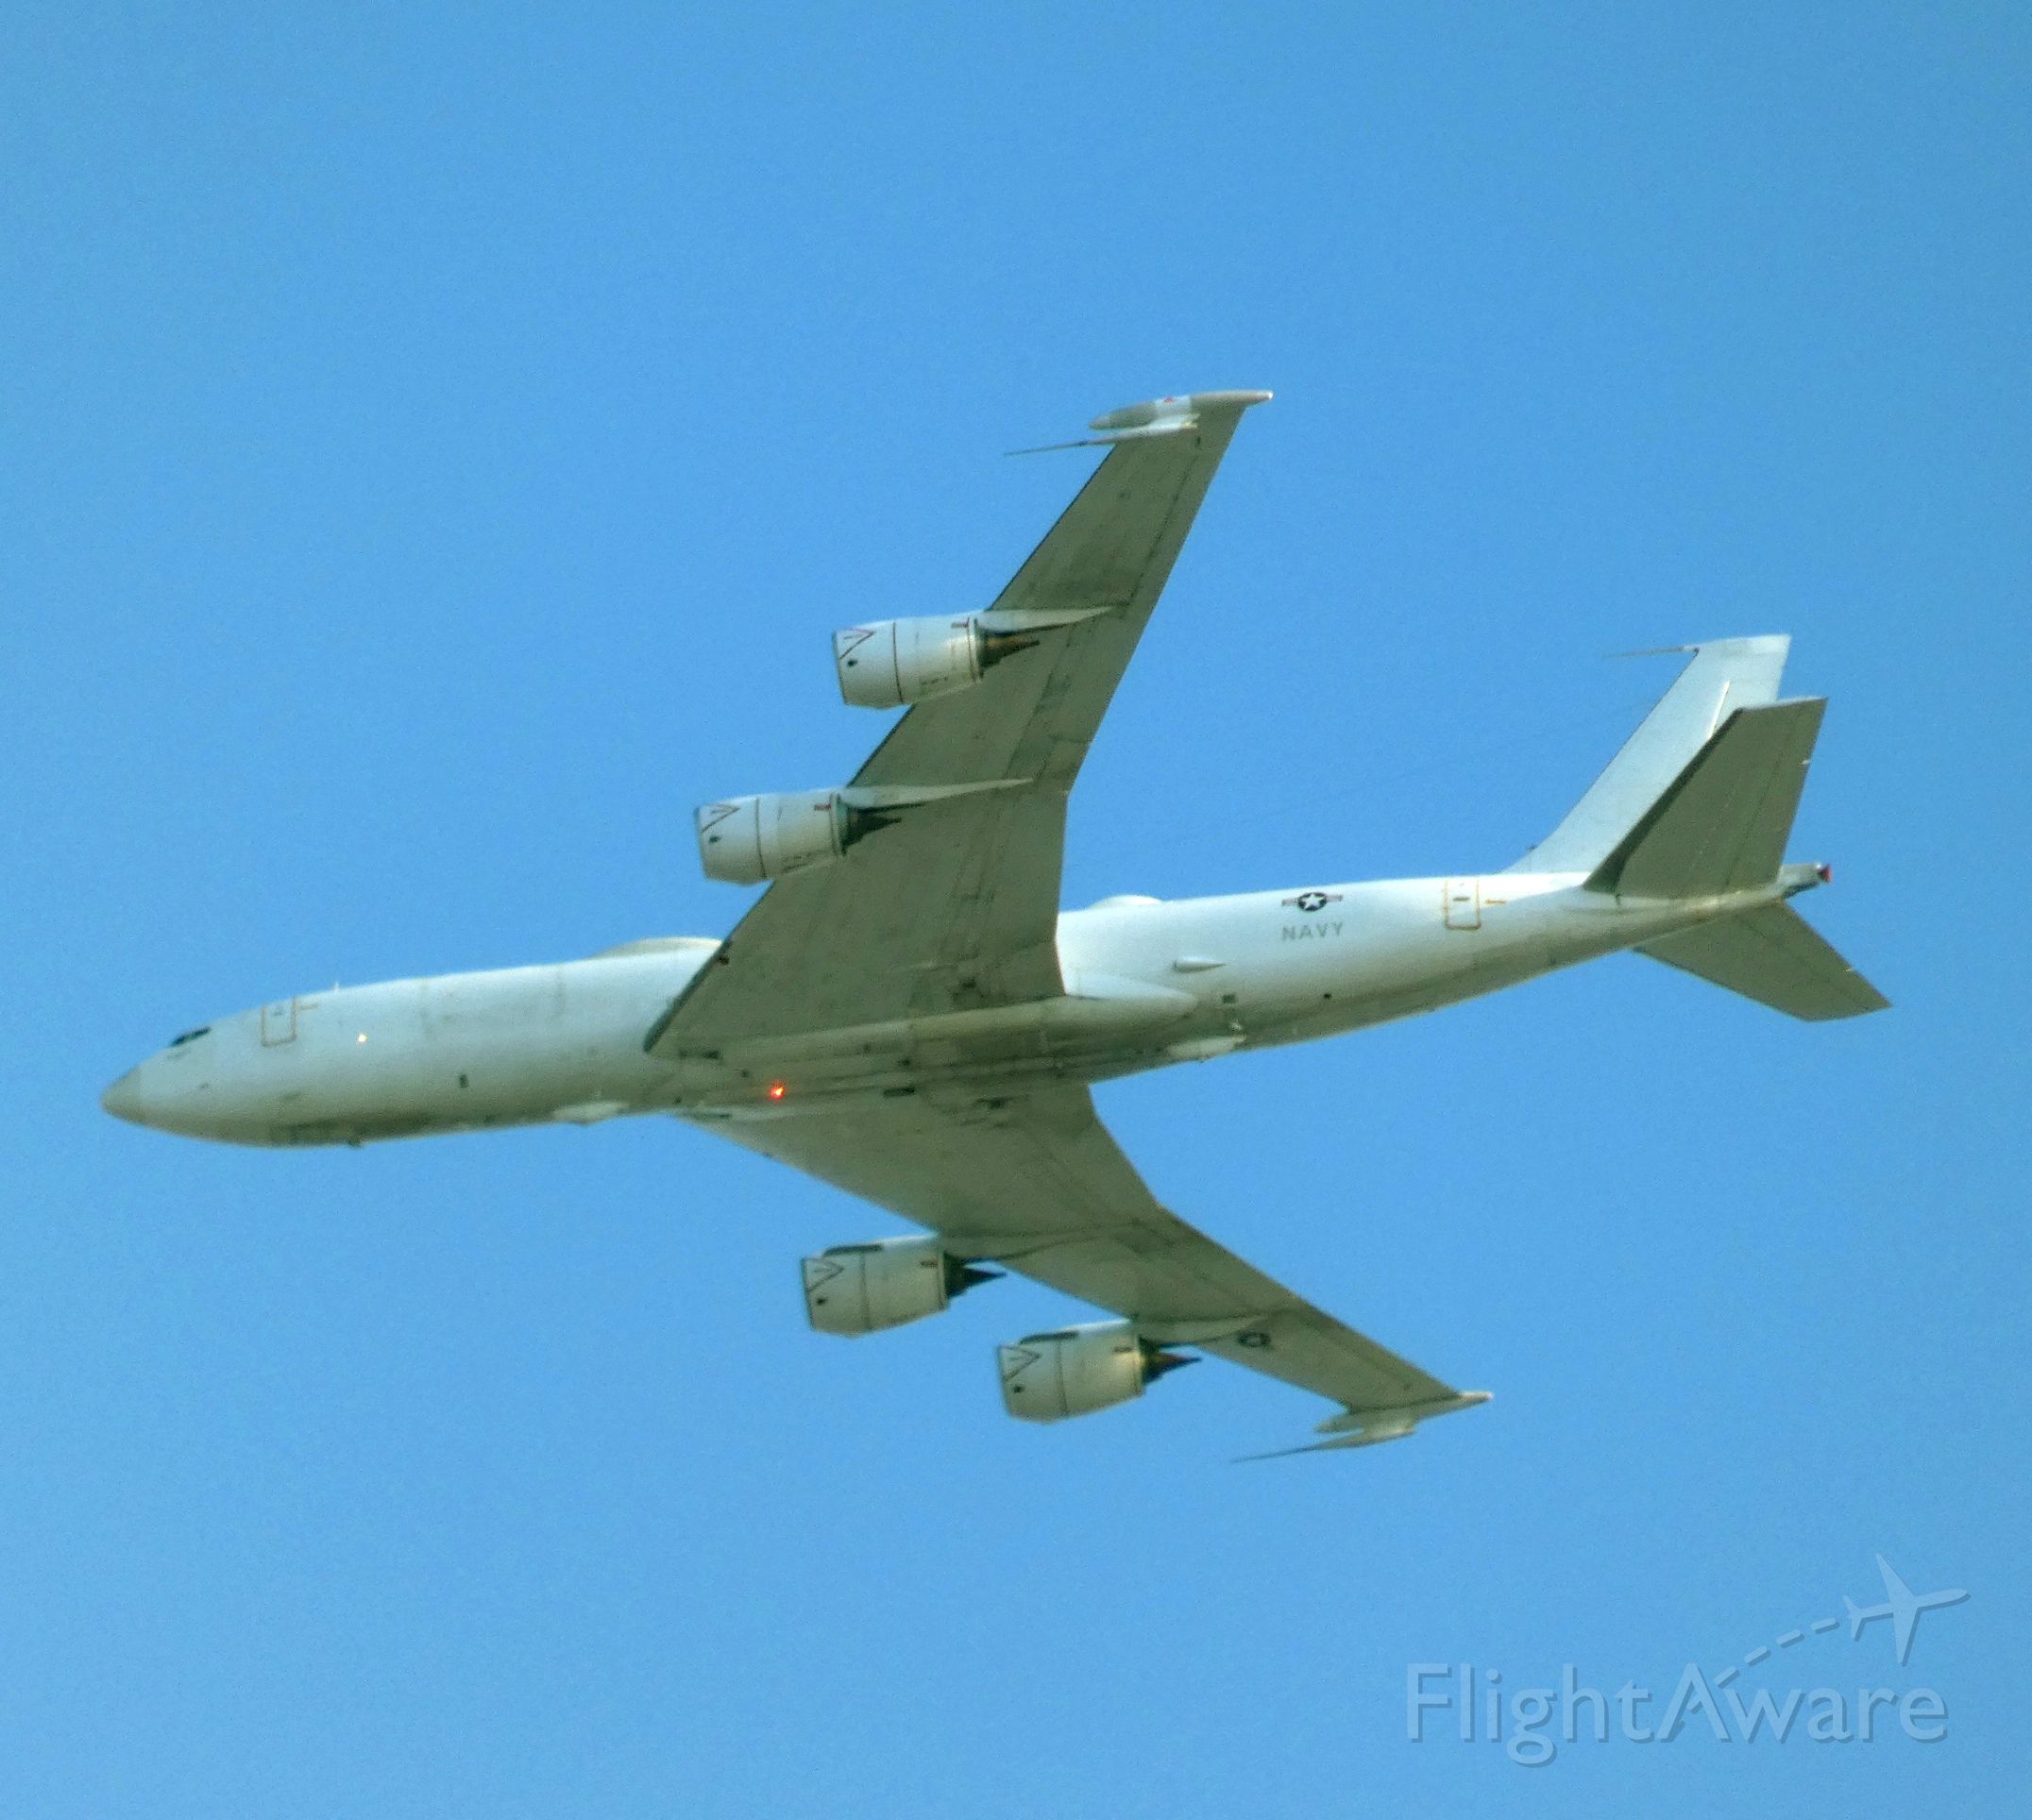 16-4410 — - US Navy Boeing E-6B Mercury from Harrisburg, PA, passing overhead enroute to KWRI, McGuire AF Base.  March 2021.